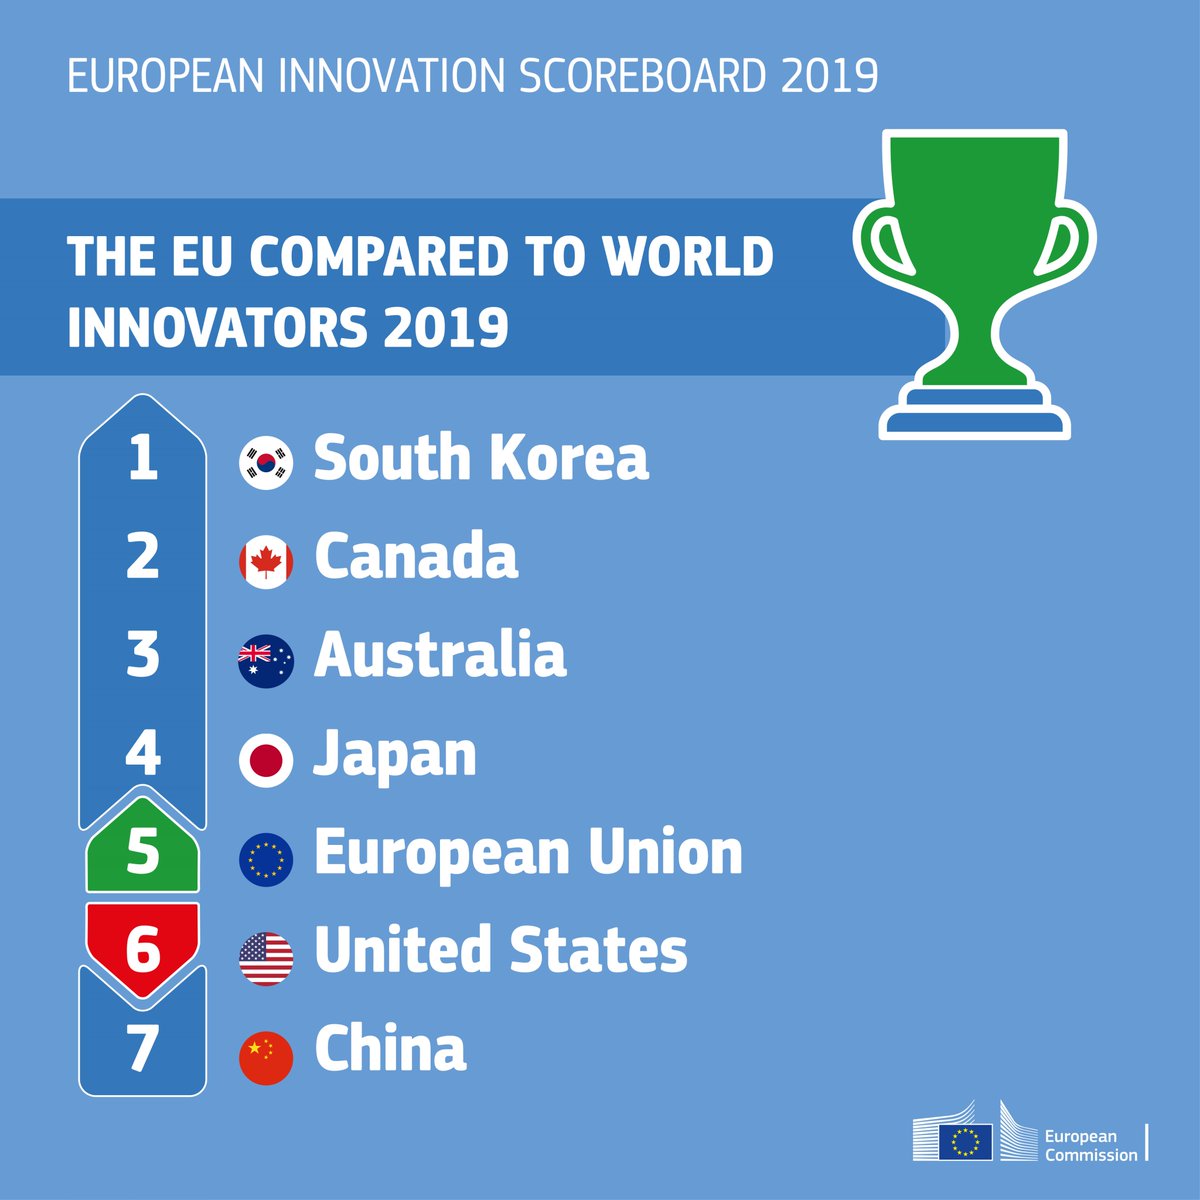 Europe is one of the top 5 global innovators - shows the new #EUInnovation Scoreboard! To keep the lead over our main global competitors, we must continue to support ambitious investments for innovation across EU and its regions europa.eu/rapid/press-re…